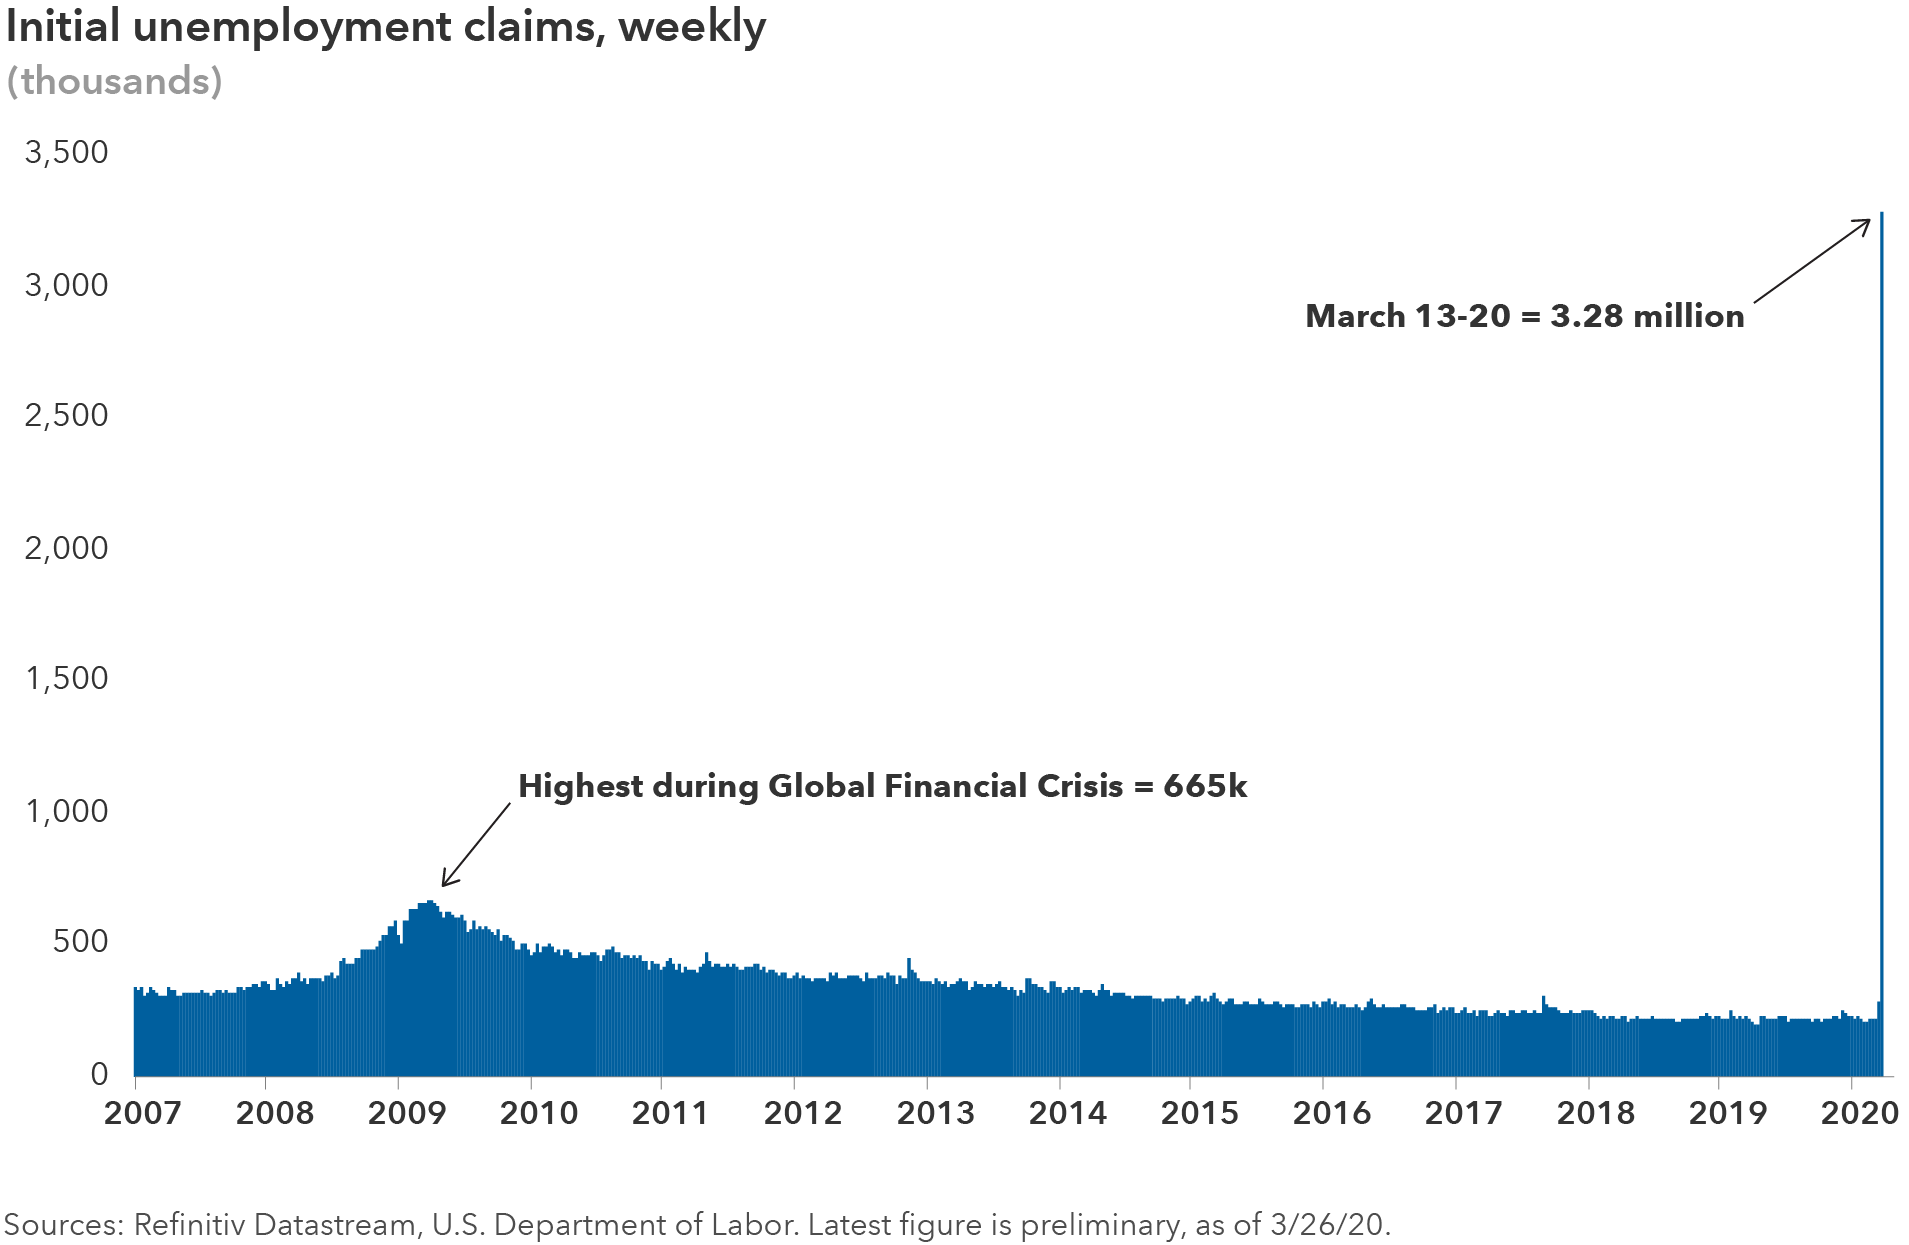 Bar chart displays weekly initial unemployment claims data from 2007 through the week ended March 20, 2020. The chart shows an enormous spike in claims to 3.28 million in the latest week from 282,000 the previous week. The previous high point shown on the chart was 665,000 in early 2009.